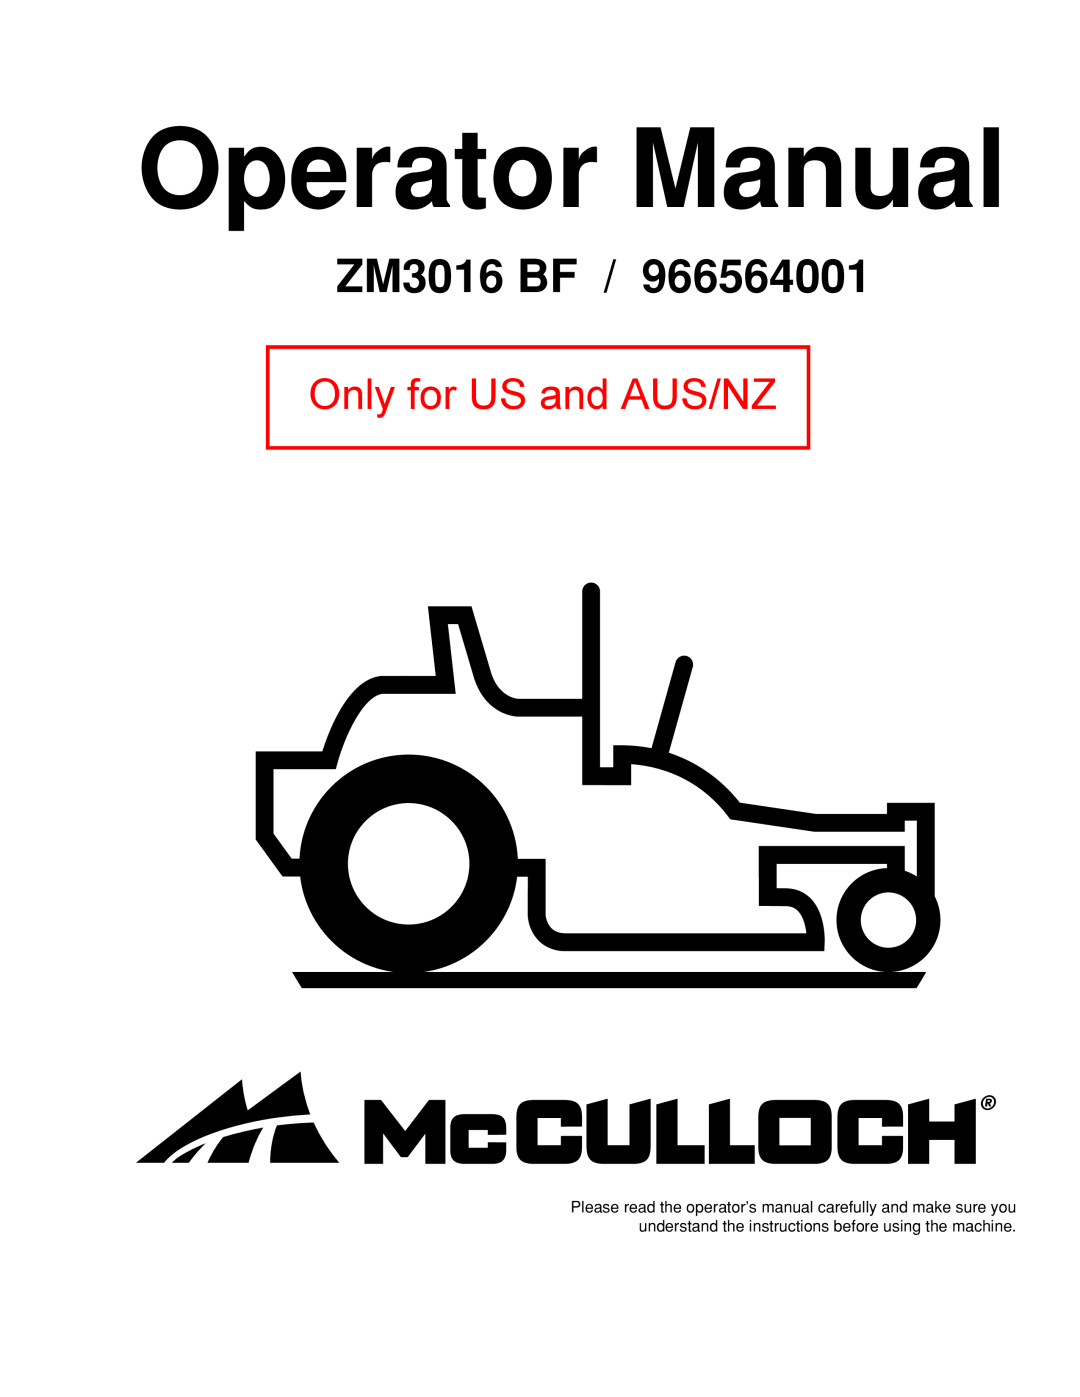 McCulloch ZM3016BF/966564001 manual Operator Manual, ZM3016 BF, Only for US and AUS/NZ 